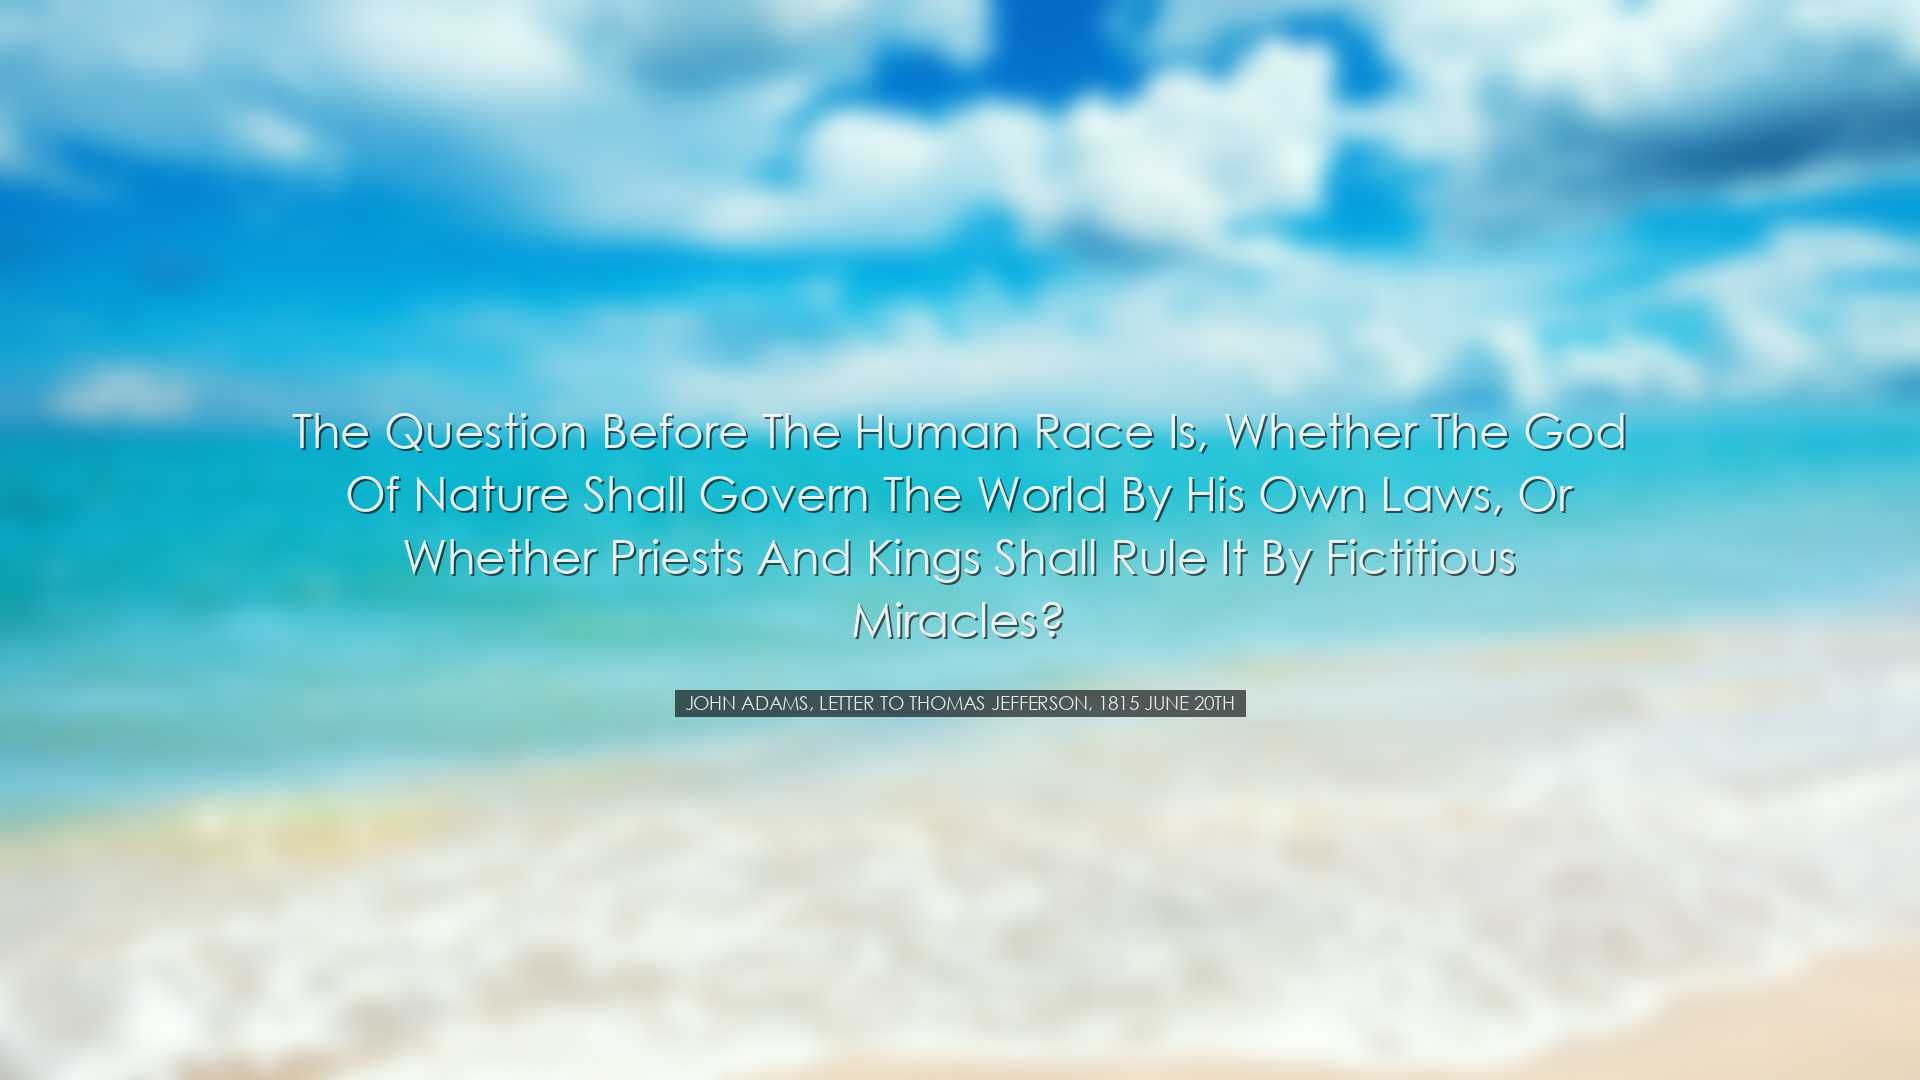 The question before the human race is, whether the God of nature s